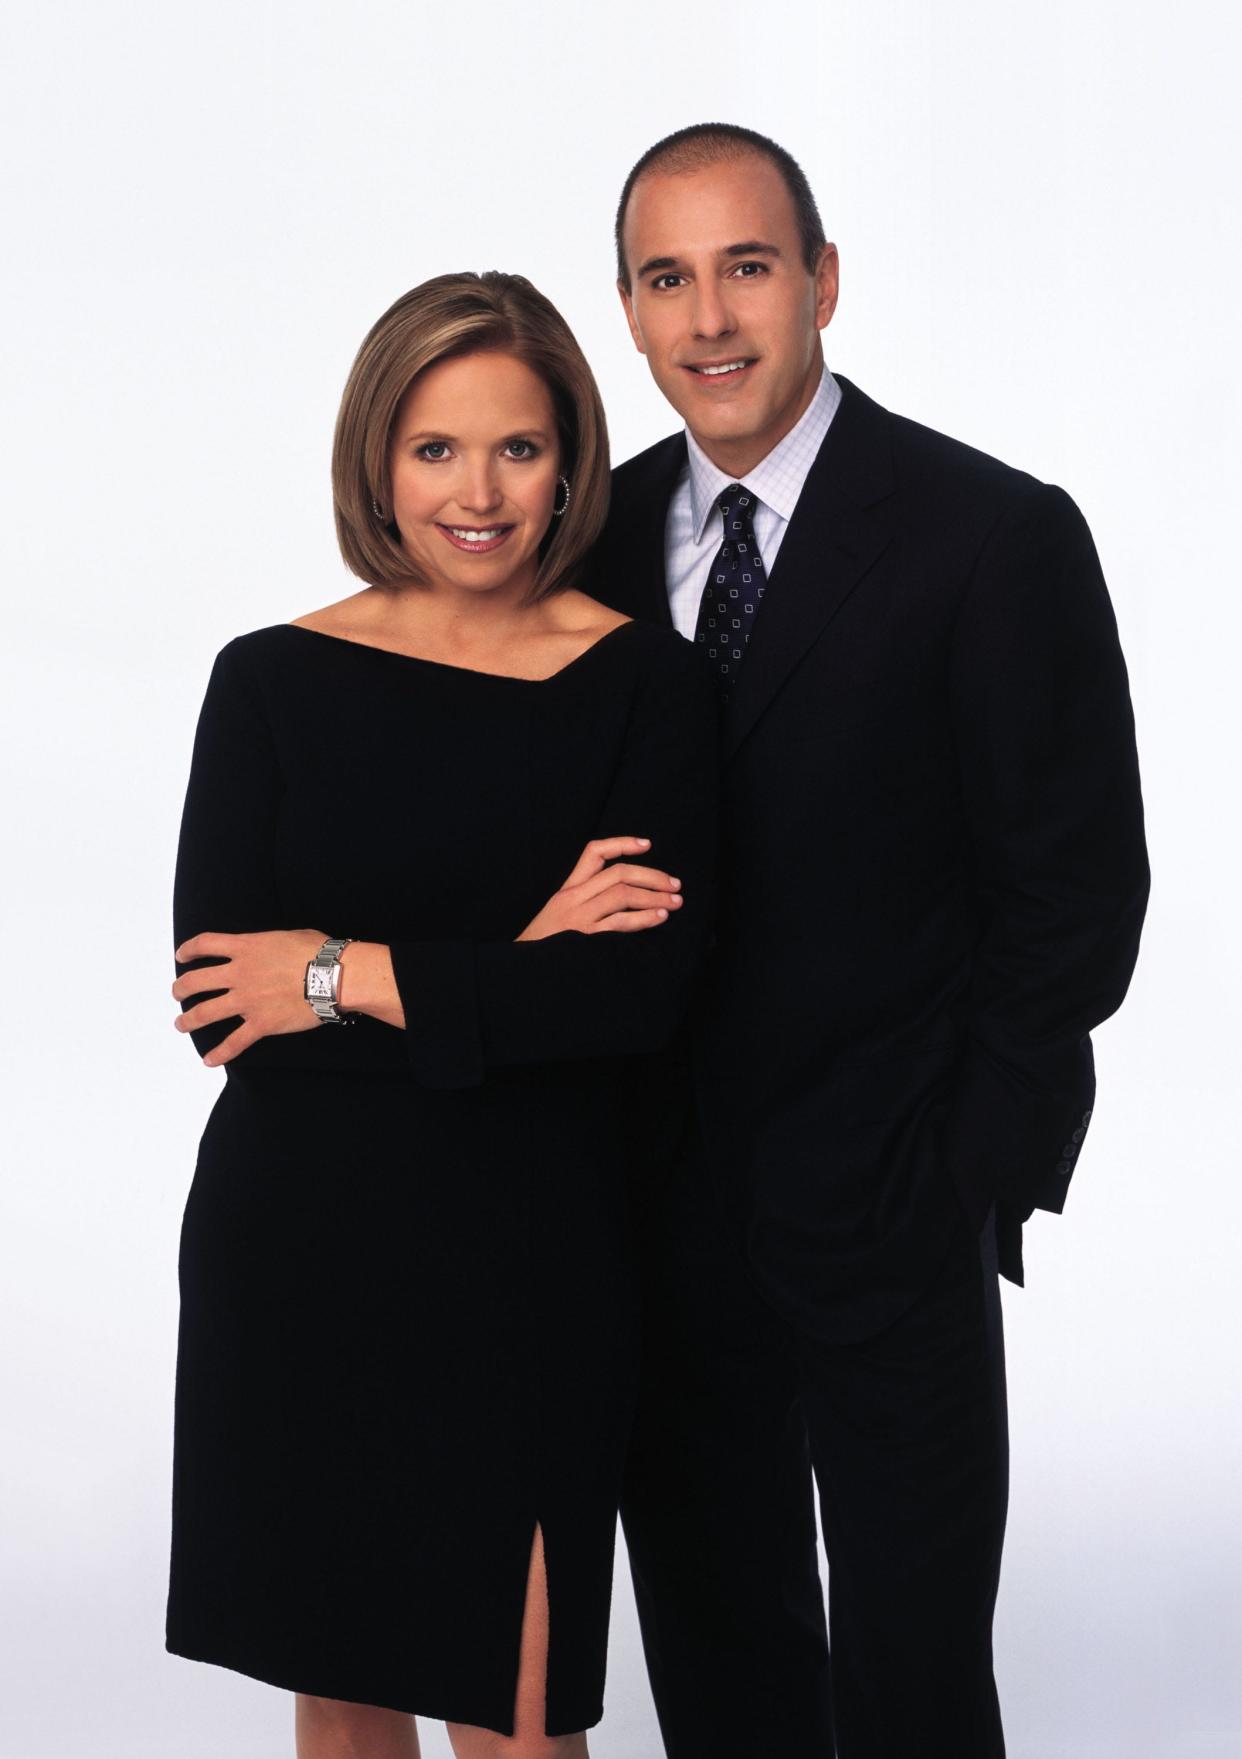 Katie Couric says her friendship with former "Today" co-anchor Matt Lauer has "evaporated."